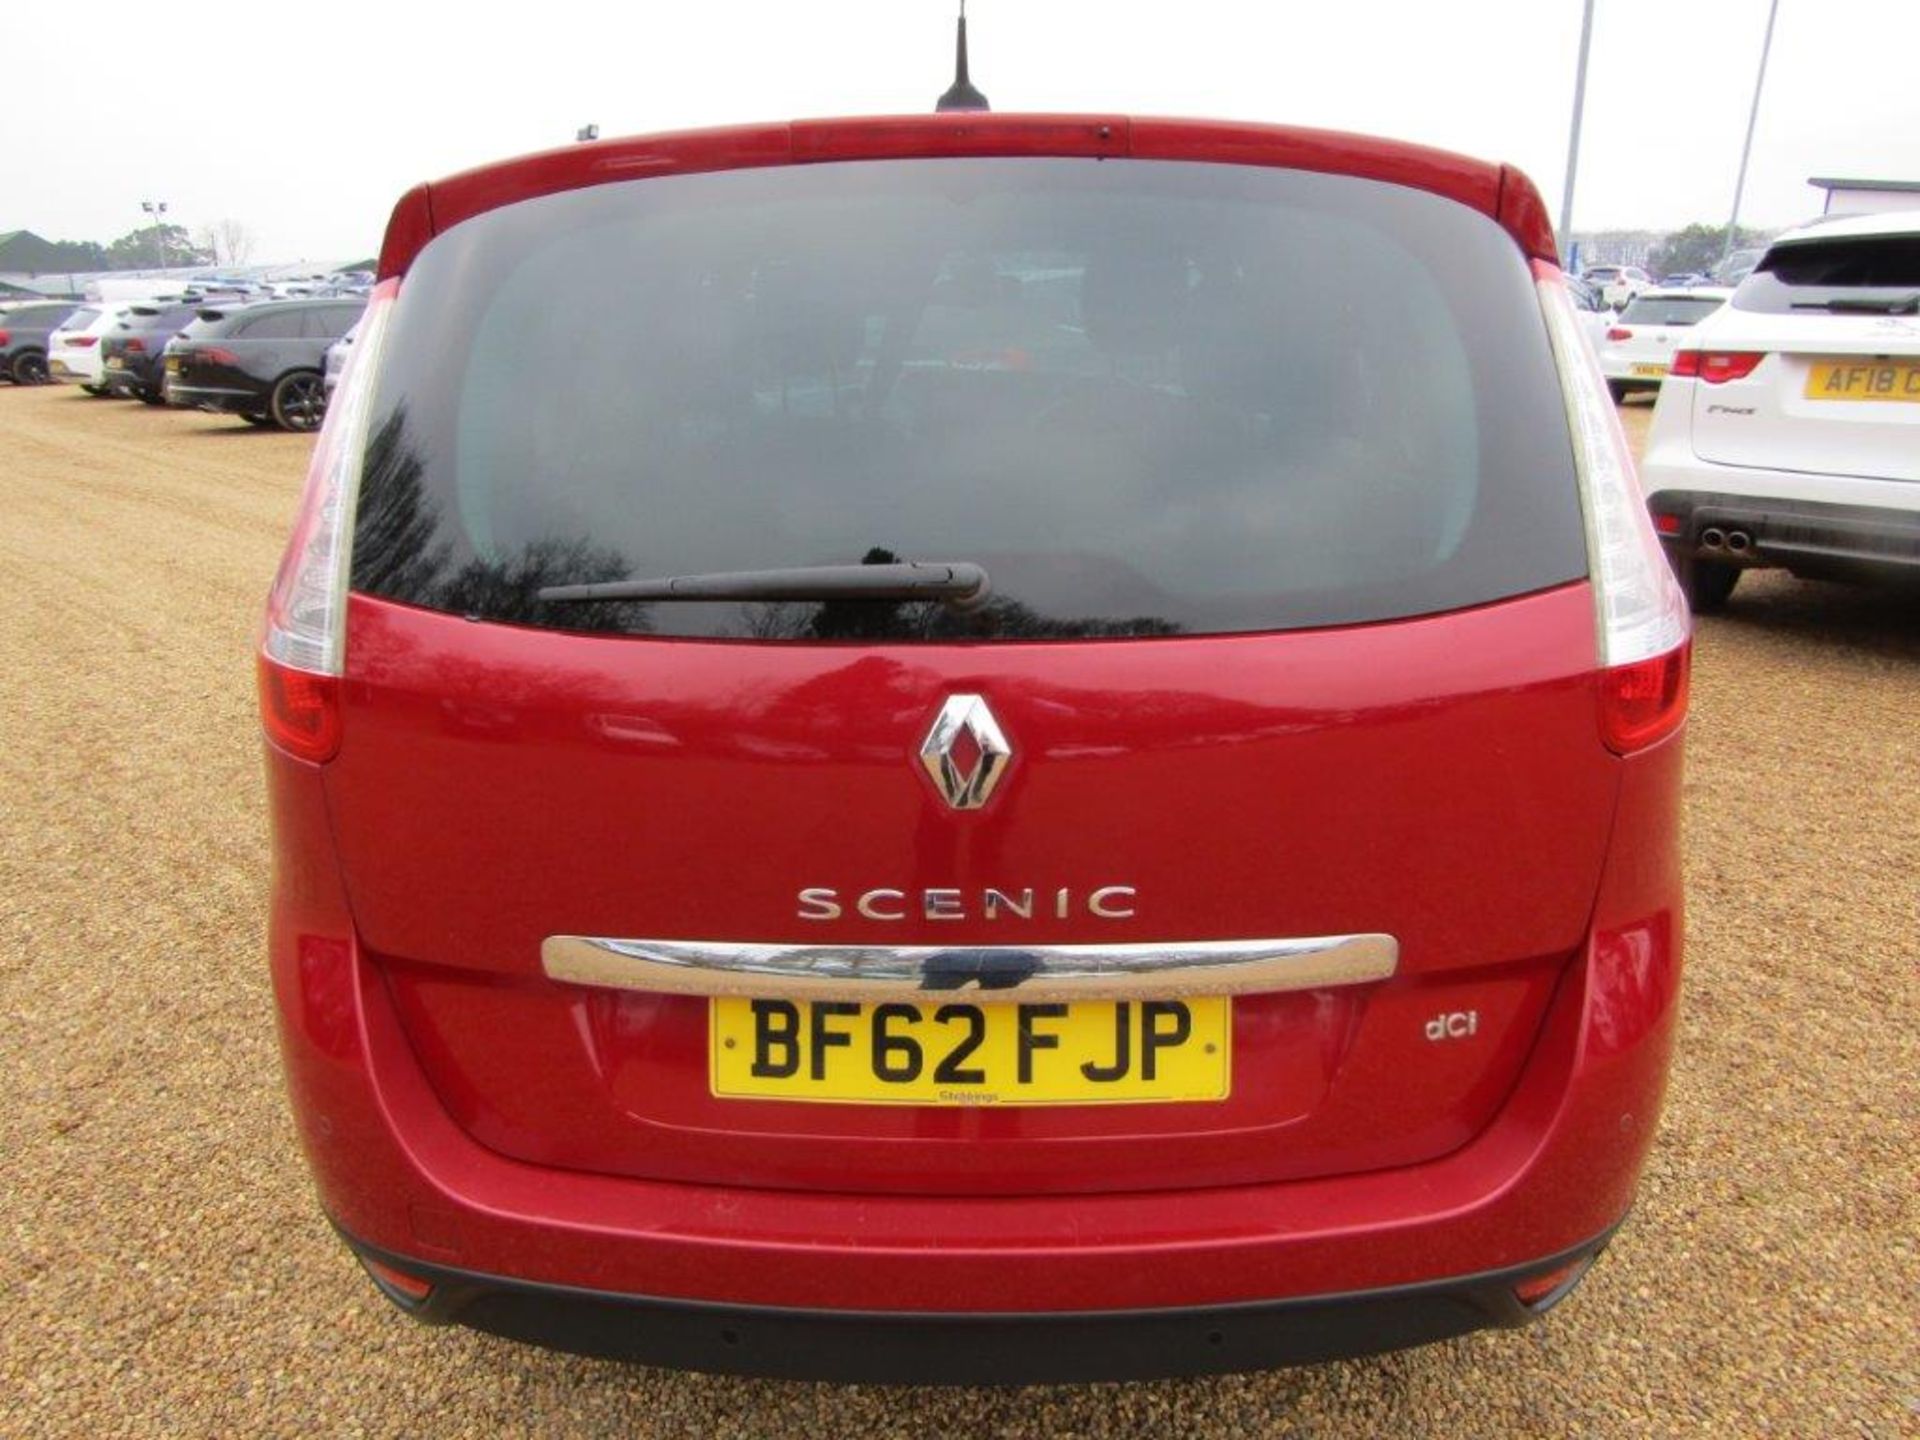 62 12 Renault GScenic D-Quettluxe - Image 2 of 23